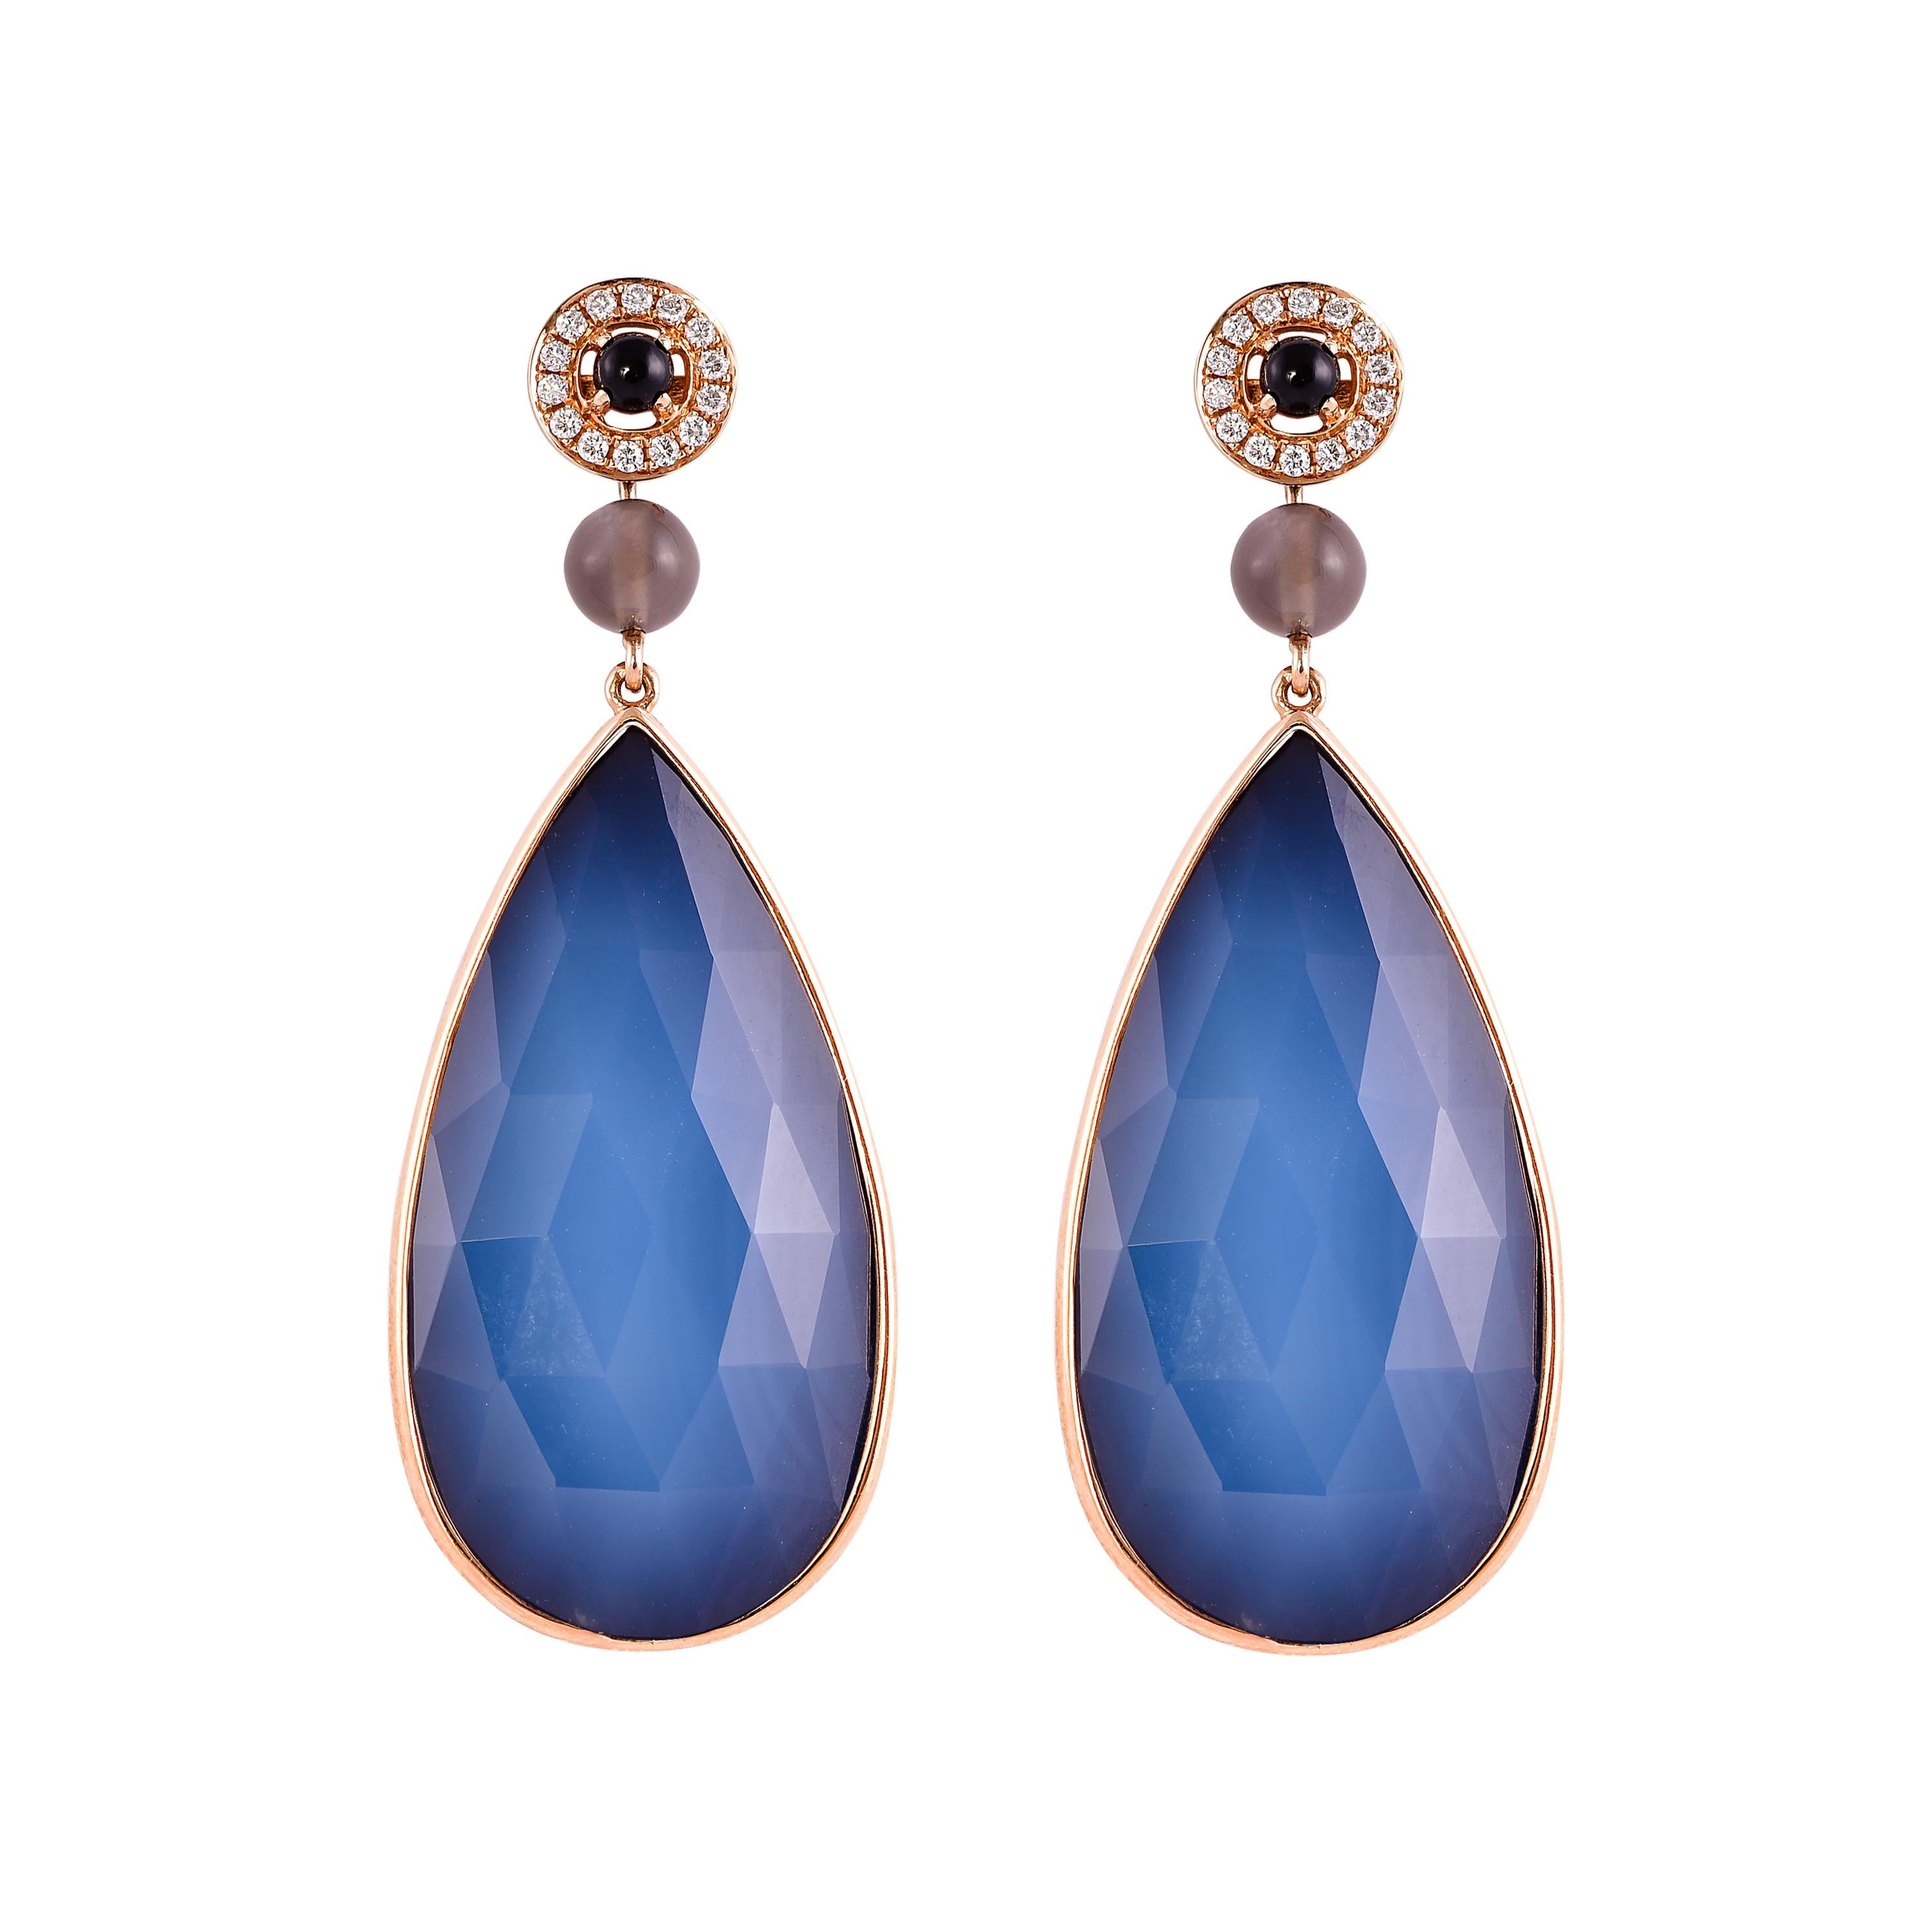  The earrings are two-sided and you can easily turn them as your heart desires! Featuring an exotic and unique cut pear cabochon, these earrings are easy to wear and showcase beautiful opaque gemstones accented with pearls and diamonds. 

White &